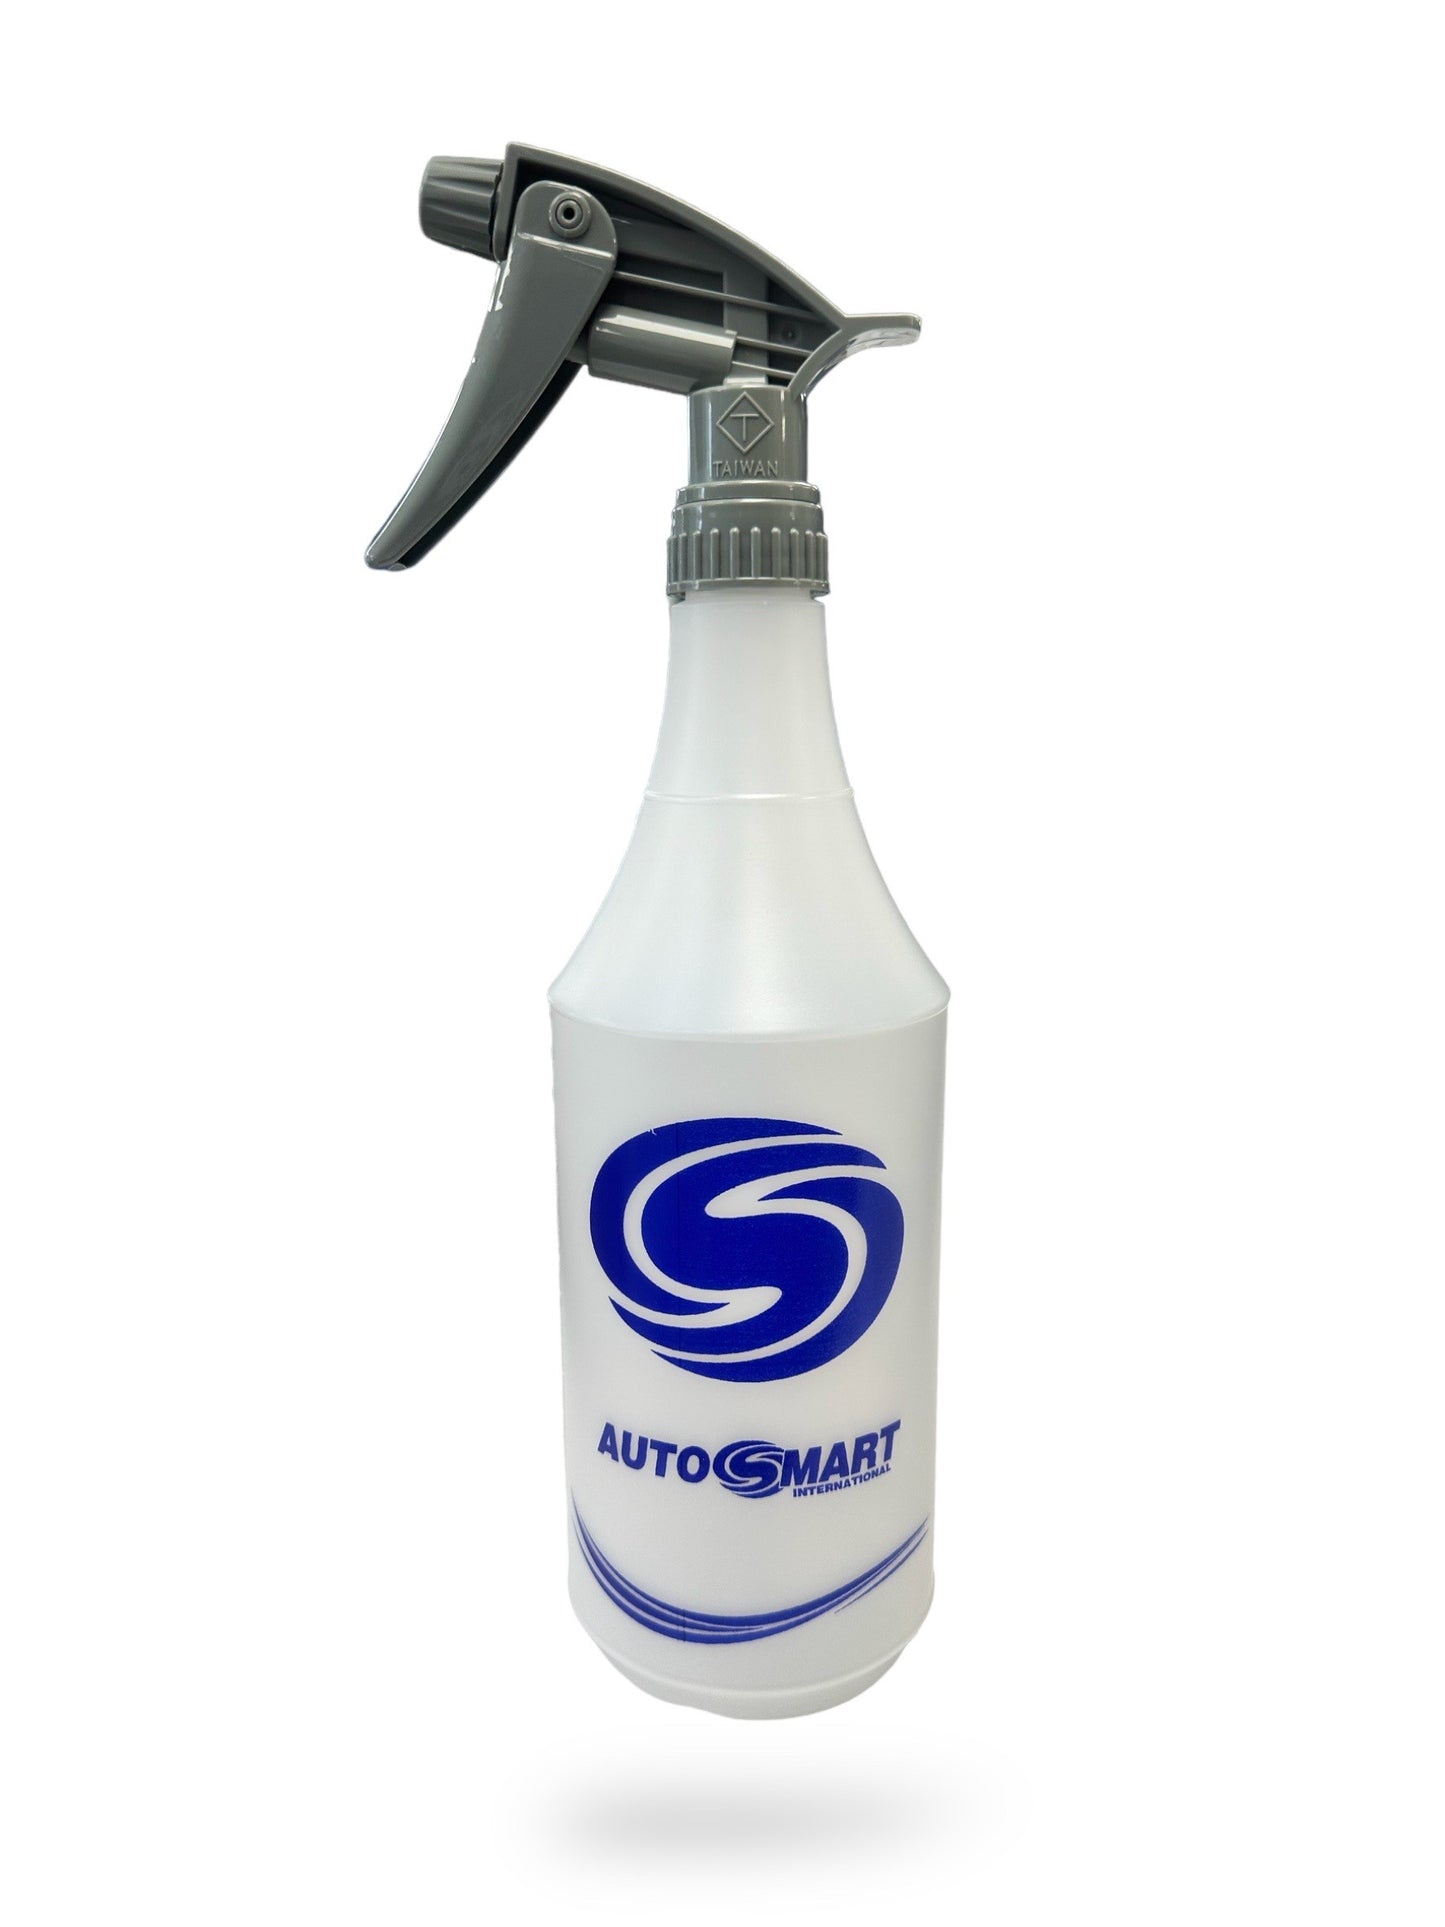 32oz Round Neck Trigger BottleAutosmart Trigger bottles are designed to last! Made with HDPE plastic to be resistant to most chemicals. For ease of filling reference a measurement chart is embossed for accurate mixing. The round neck gives an ergonomic fe